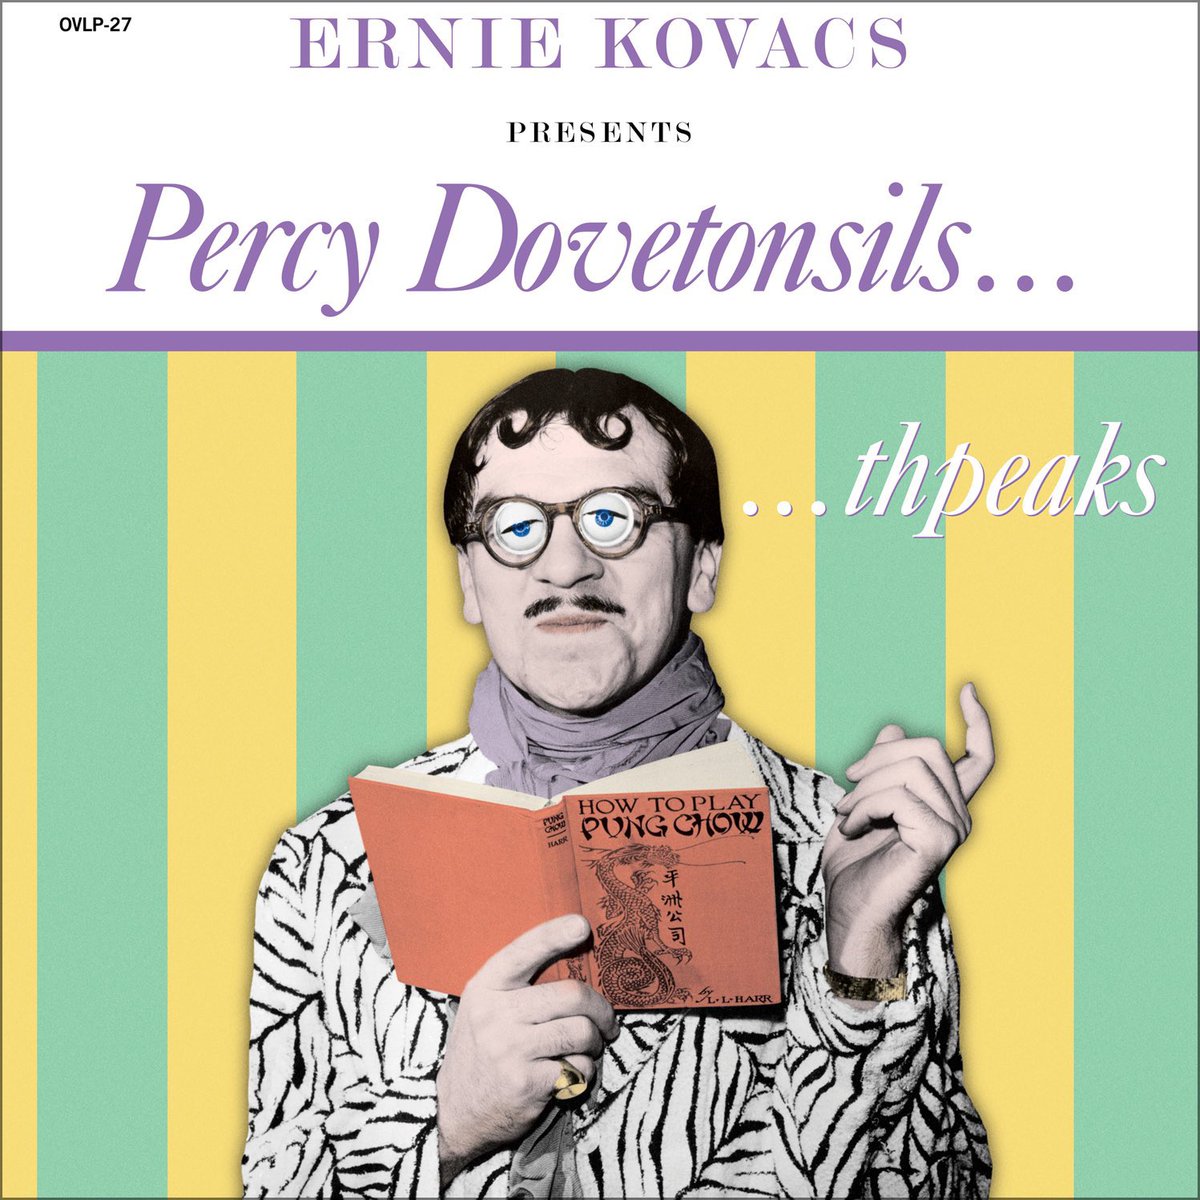 There’s Percy! Get this on vinyl or CD direct from us along with books, posters, photos, DVDs & more from both Edie & @RealErnieKovacs! All available here - and if you order by Friday, we’ll get it to you by Chrithmath! shop.edieadams.com